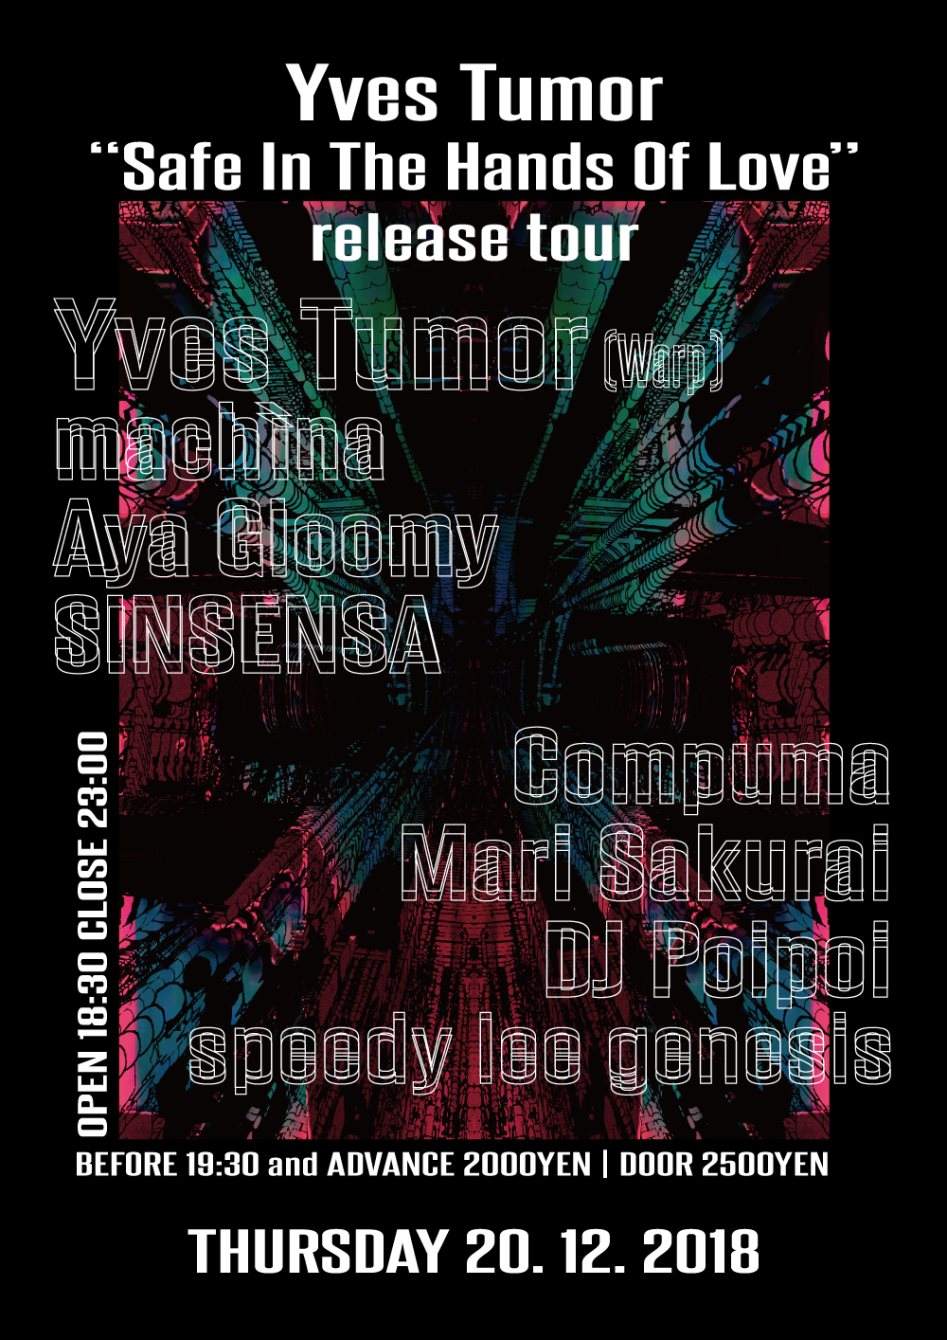 Yves Tumor “Safe In The Hands Of Love” Release Tour - フライヤー表